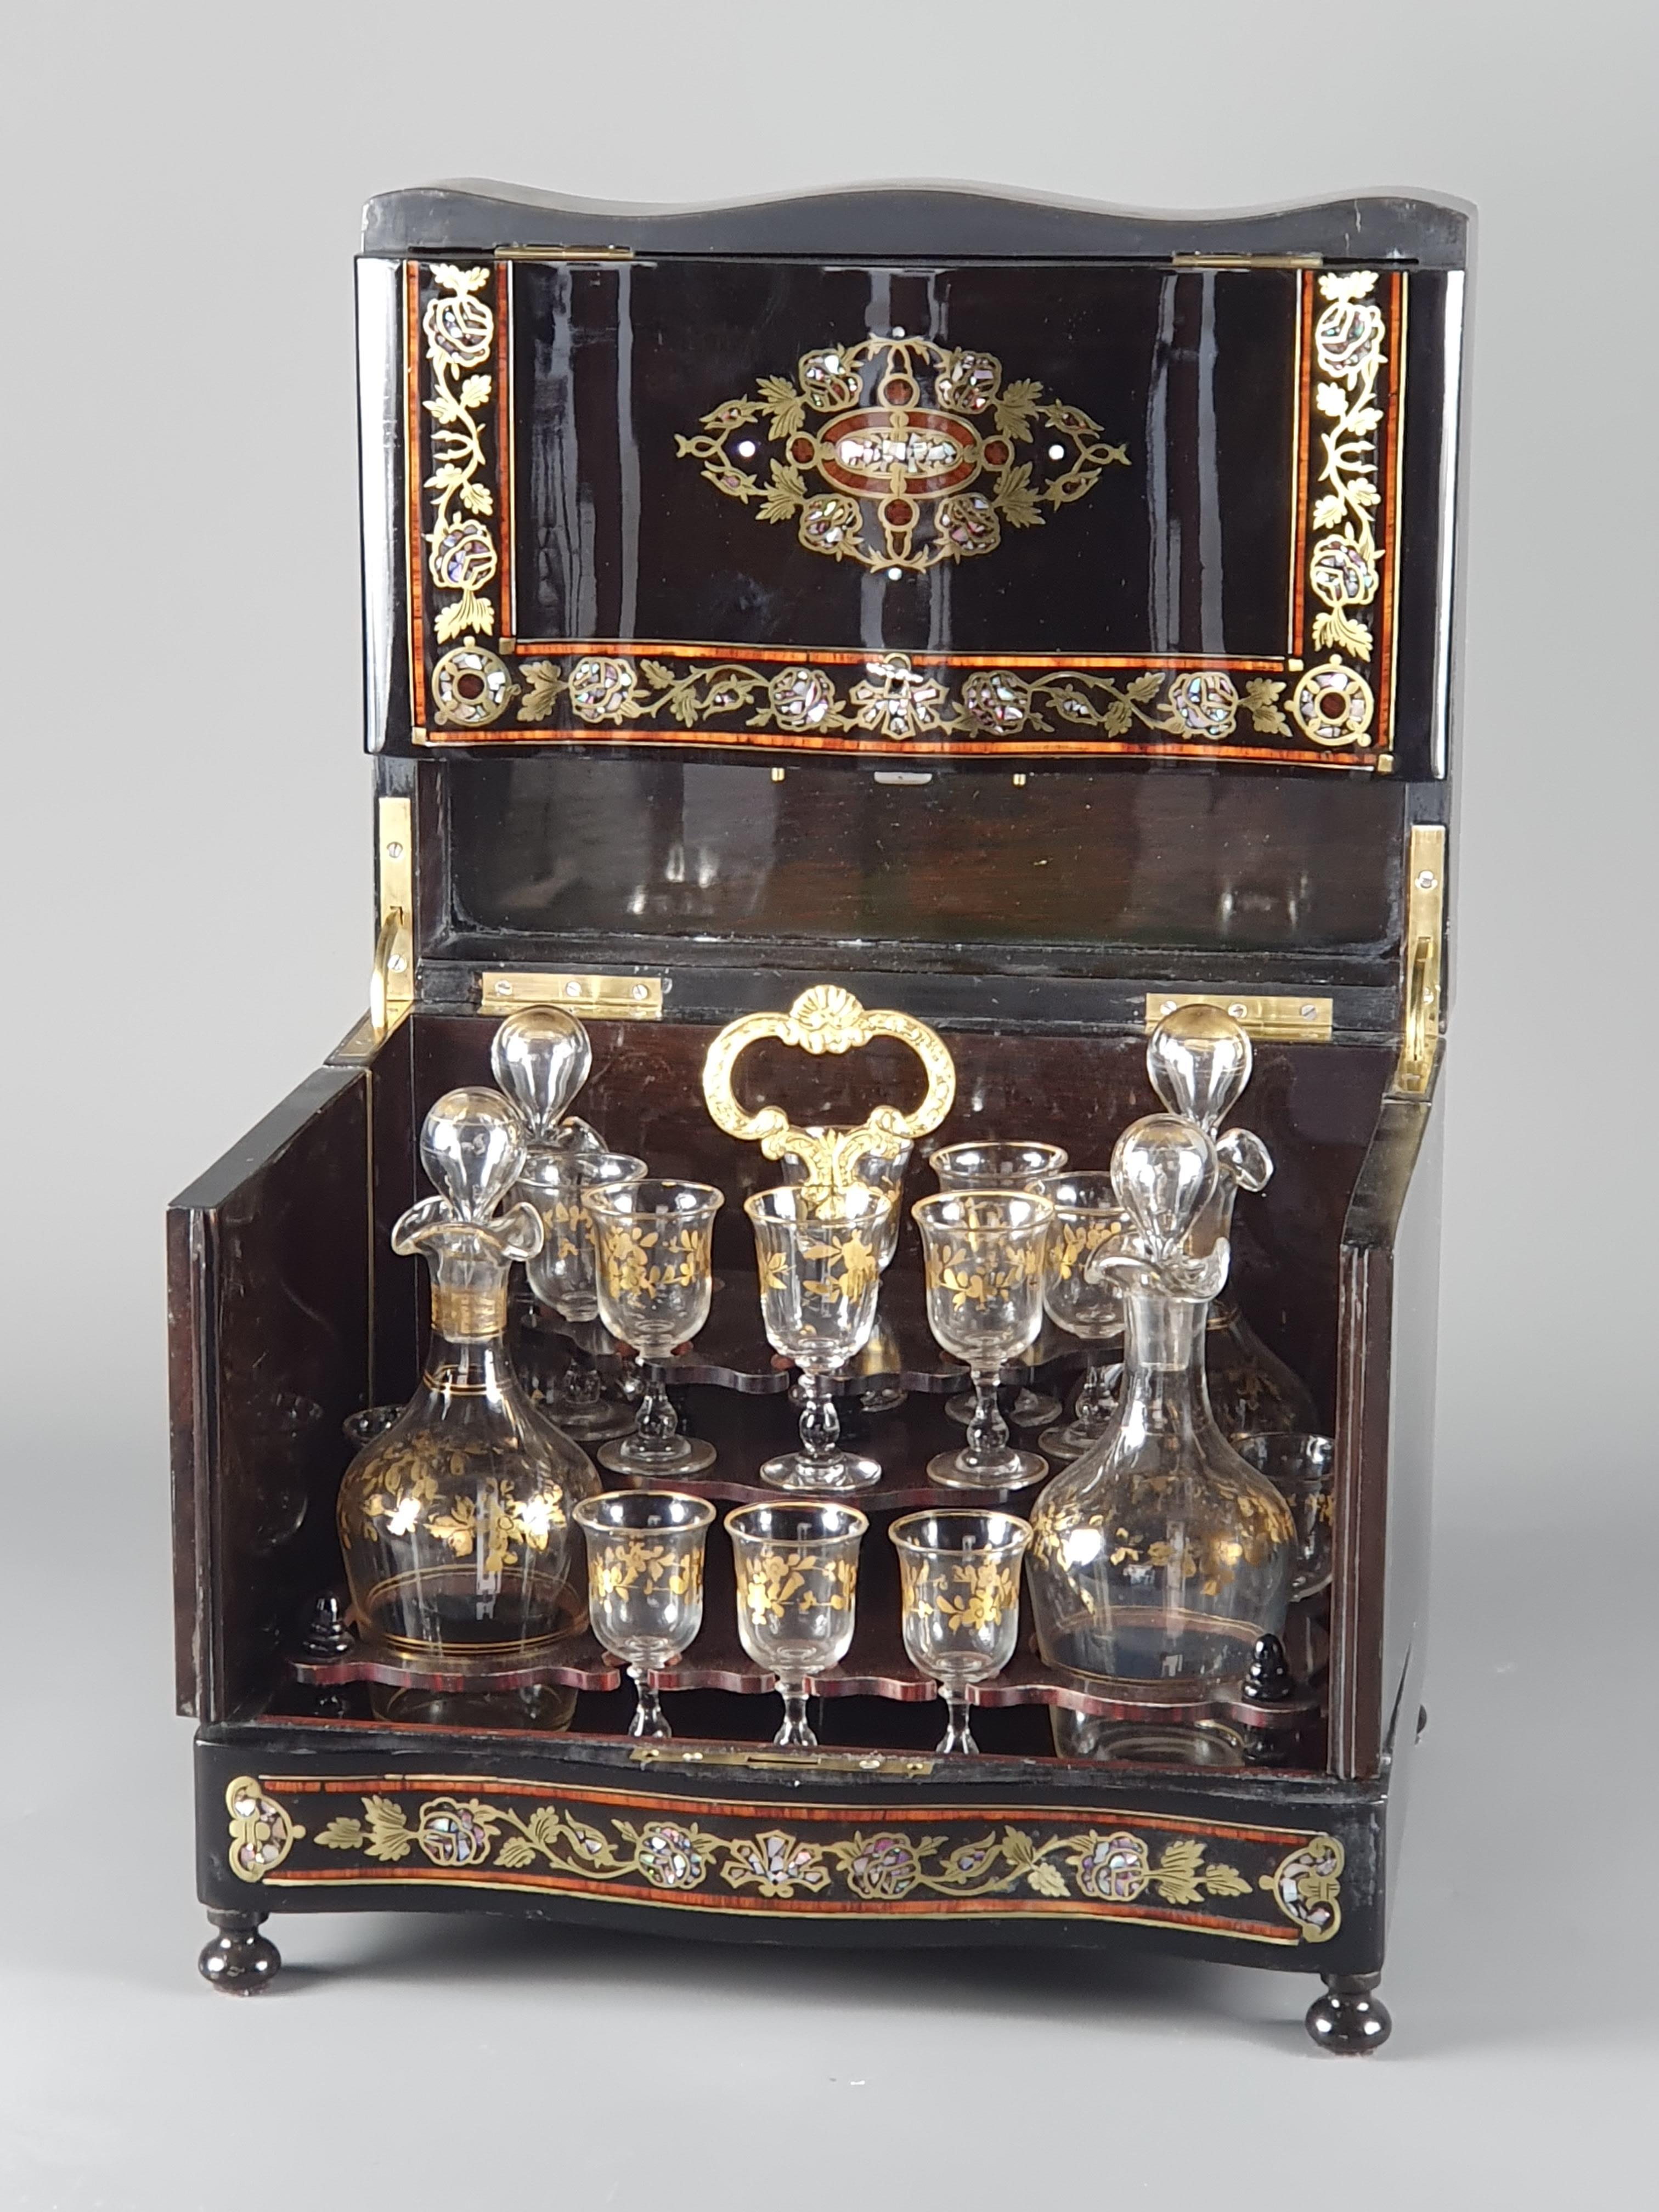 Beautiful Napoleon III liqueur cellar in blackened wood and marquetry of brass, mother-of-pearl, and rosewood fillets. Interior lined with a crystal service with beautiful floral decorations gilded with fine gold, consisting of 4 carafes and 15